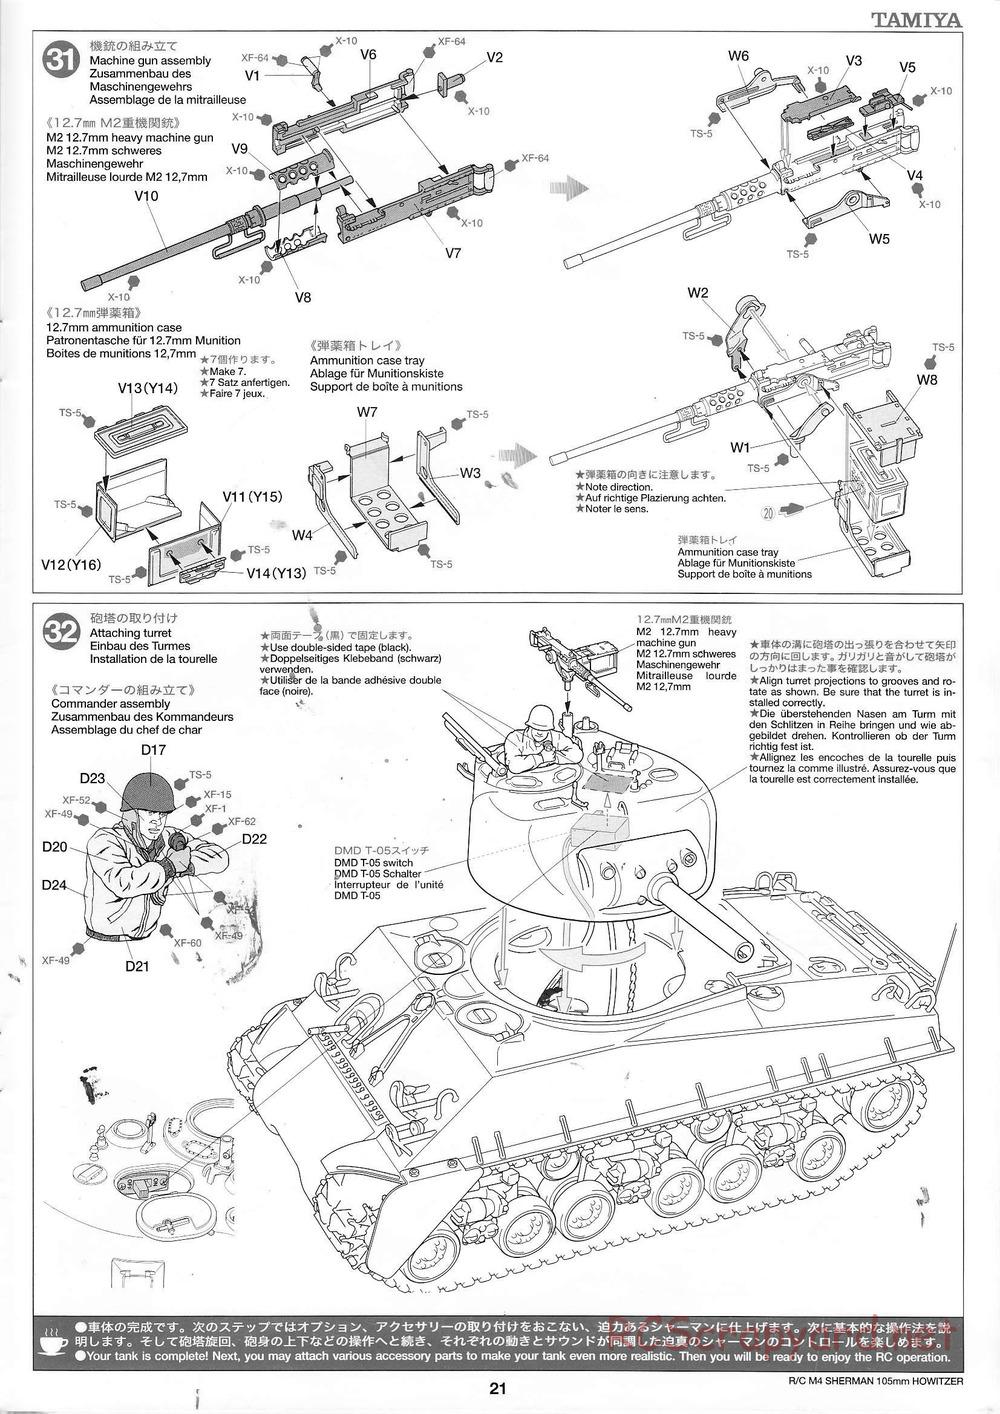 Tamiya - M4 Sherman 105mm Howitzer - 1/16 Scale Chassis - Manual - Page 21